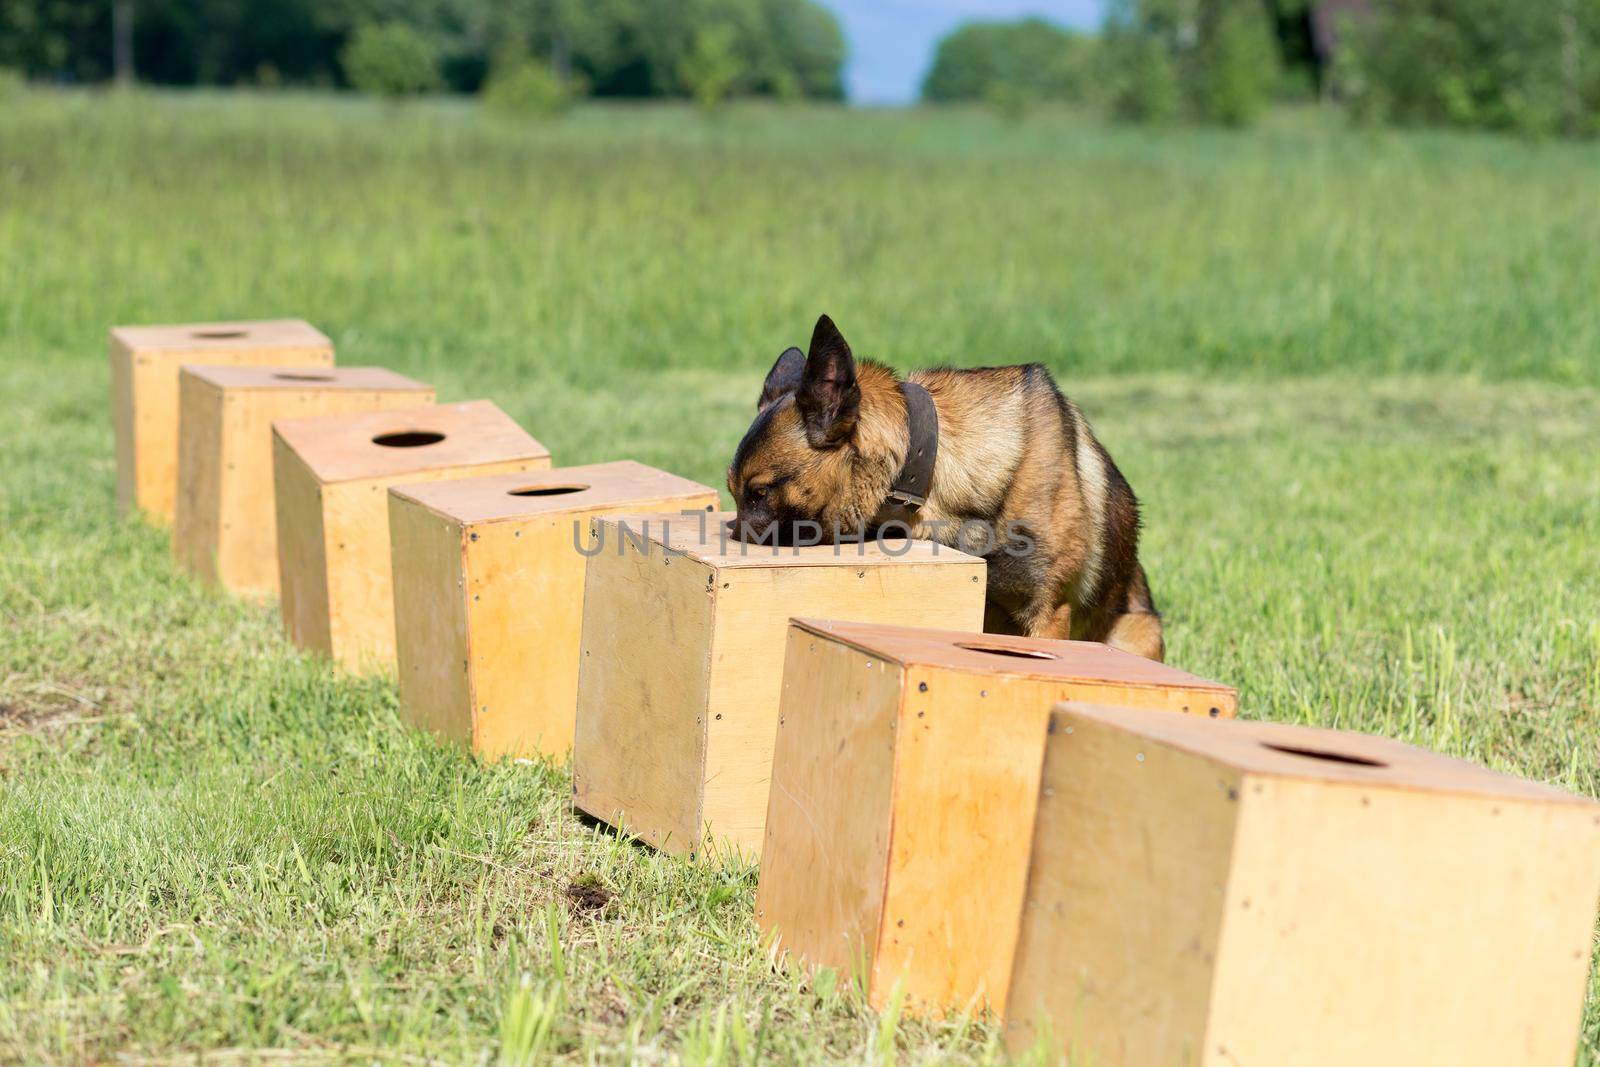 A Belgian Sheepdog sniffs a row of containers in search of one with a hidden object. The dog sits down and freezes to tell the owner that it has found the object. Training to train service dogs for the police, customs or border service.